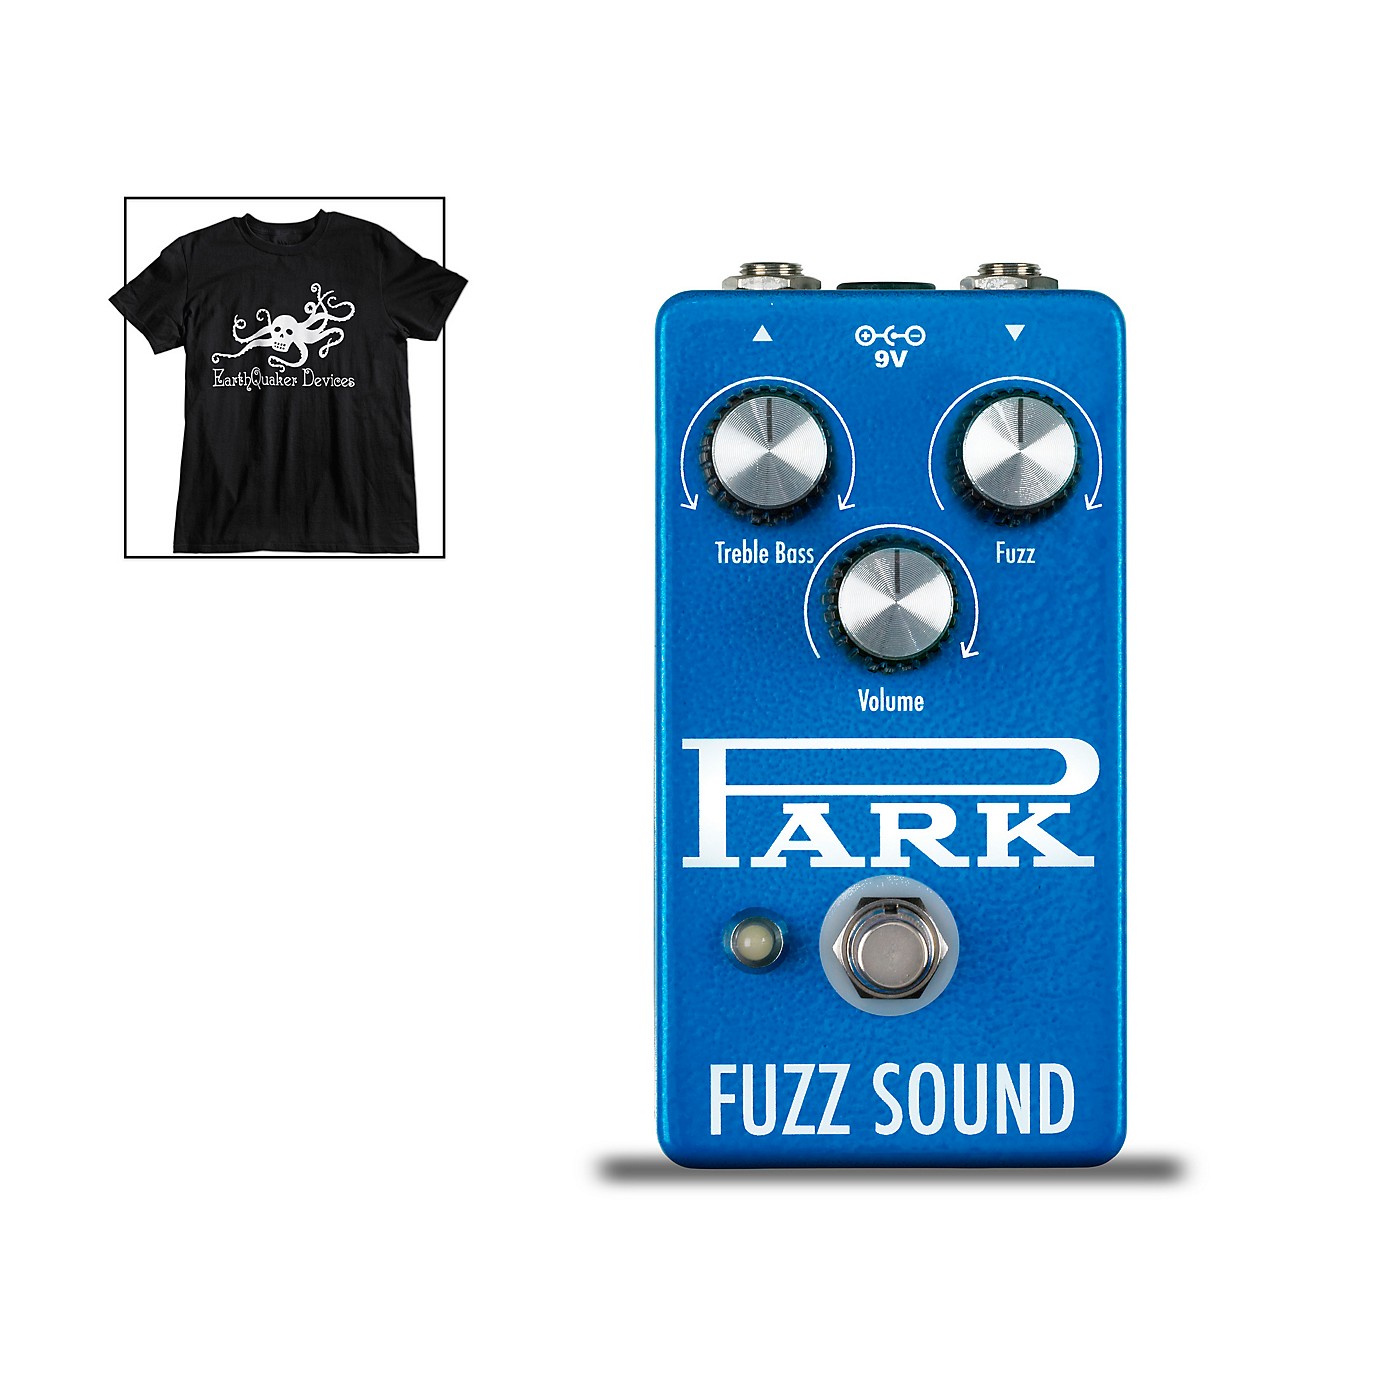 EarthQuaker Devices Park Fuzz Vintage Tone Guitar Effects Pedal and Octoskull T-Shirt Large Black thumbnail